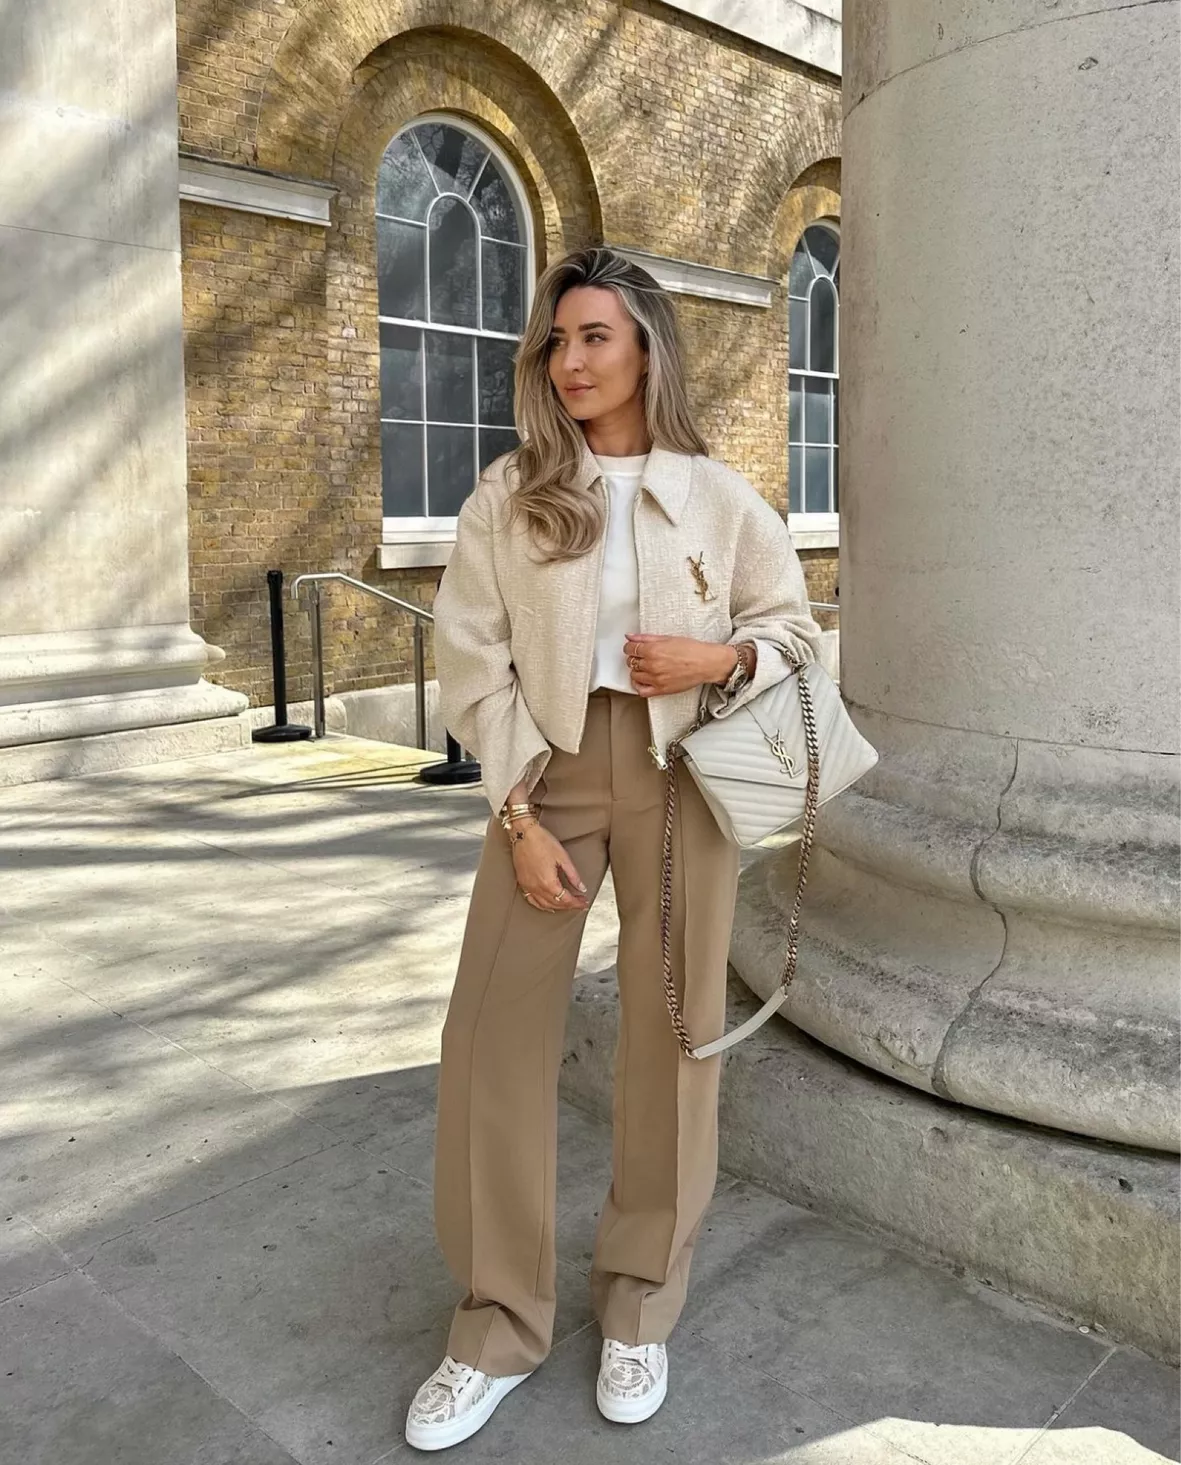 In The Style - NUDES ARE IN 👀 How unreal does this outfit look babes,  @freyakillin looks incredible in our @lornaluxe jumper and suede leggings,  we are OBSESSED 🔥🔥🔥 get the whole